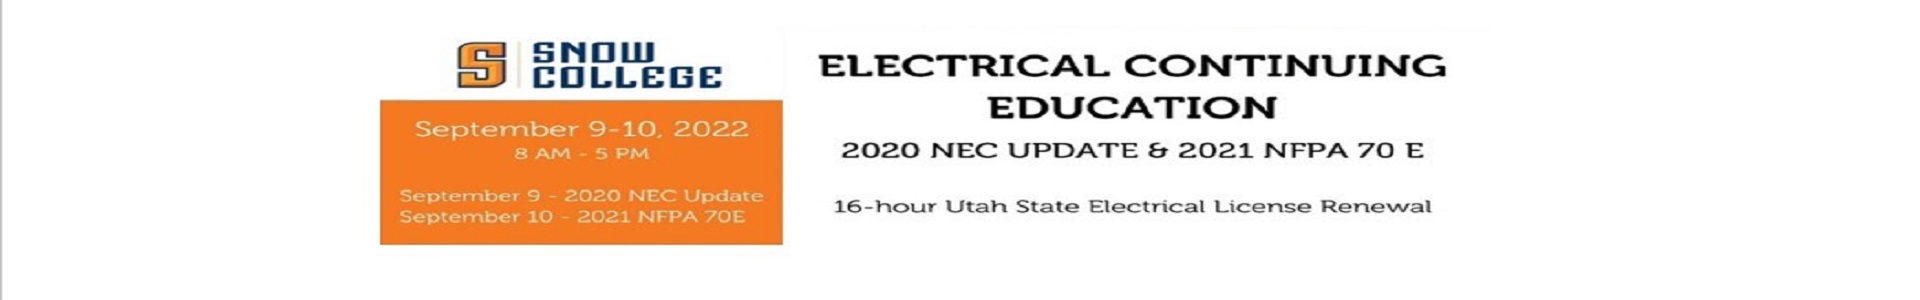 Snow College Continuing Education Sep. 9th-10th